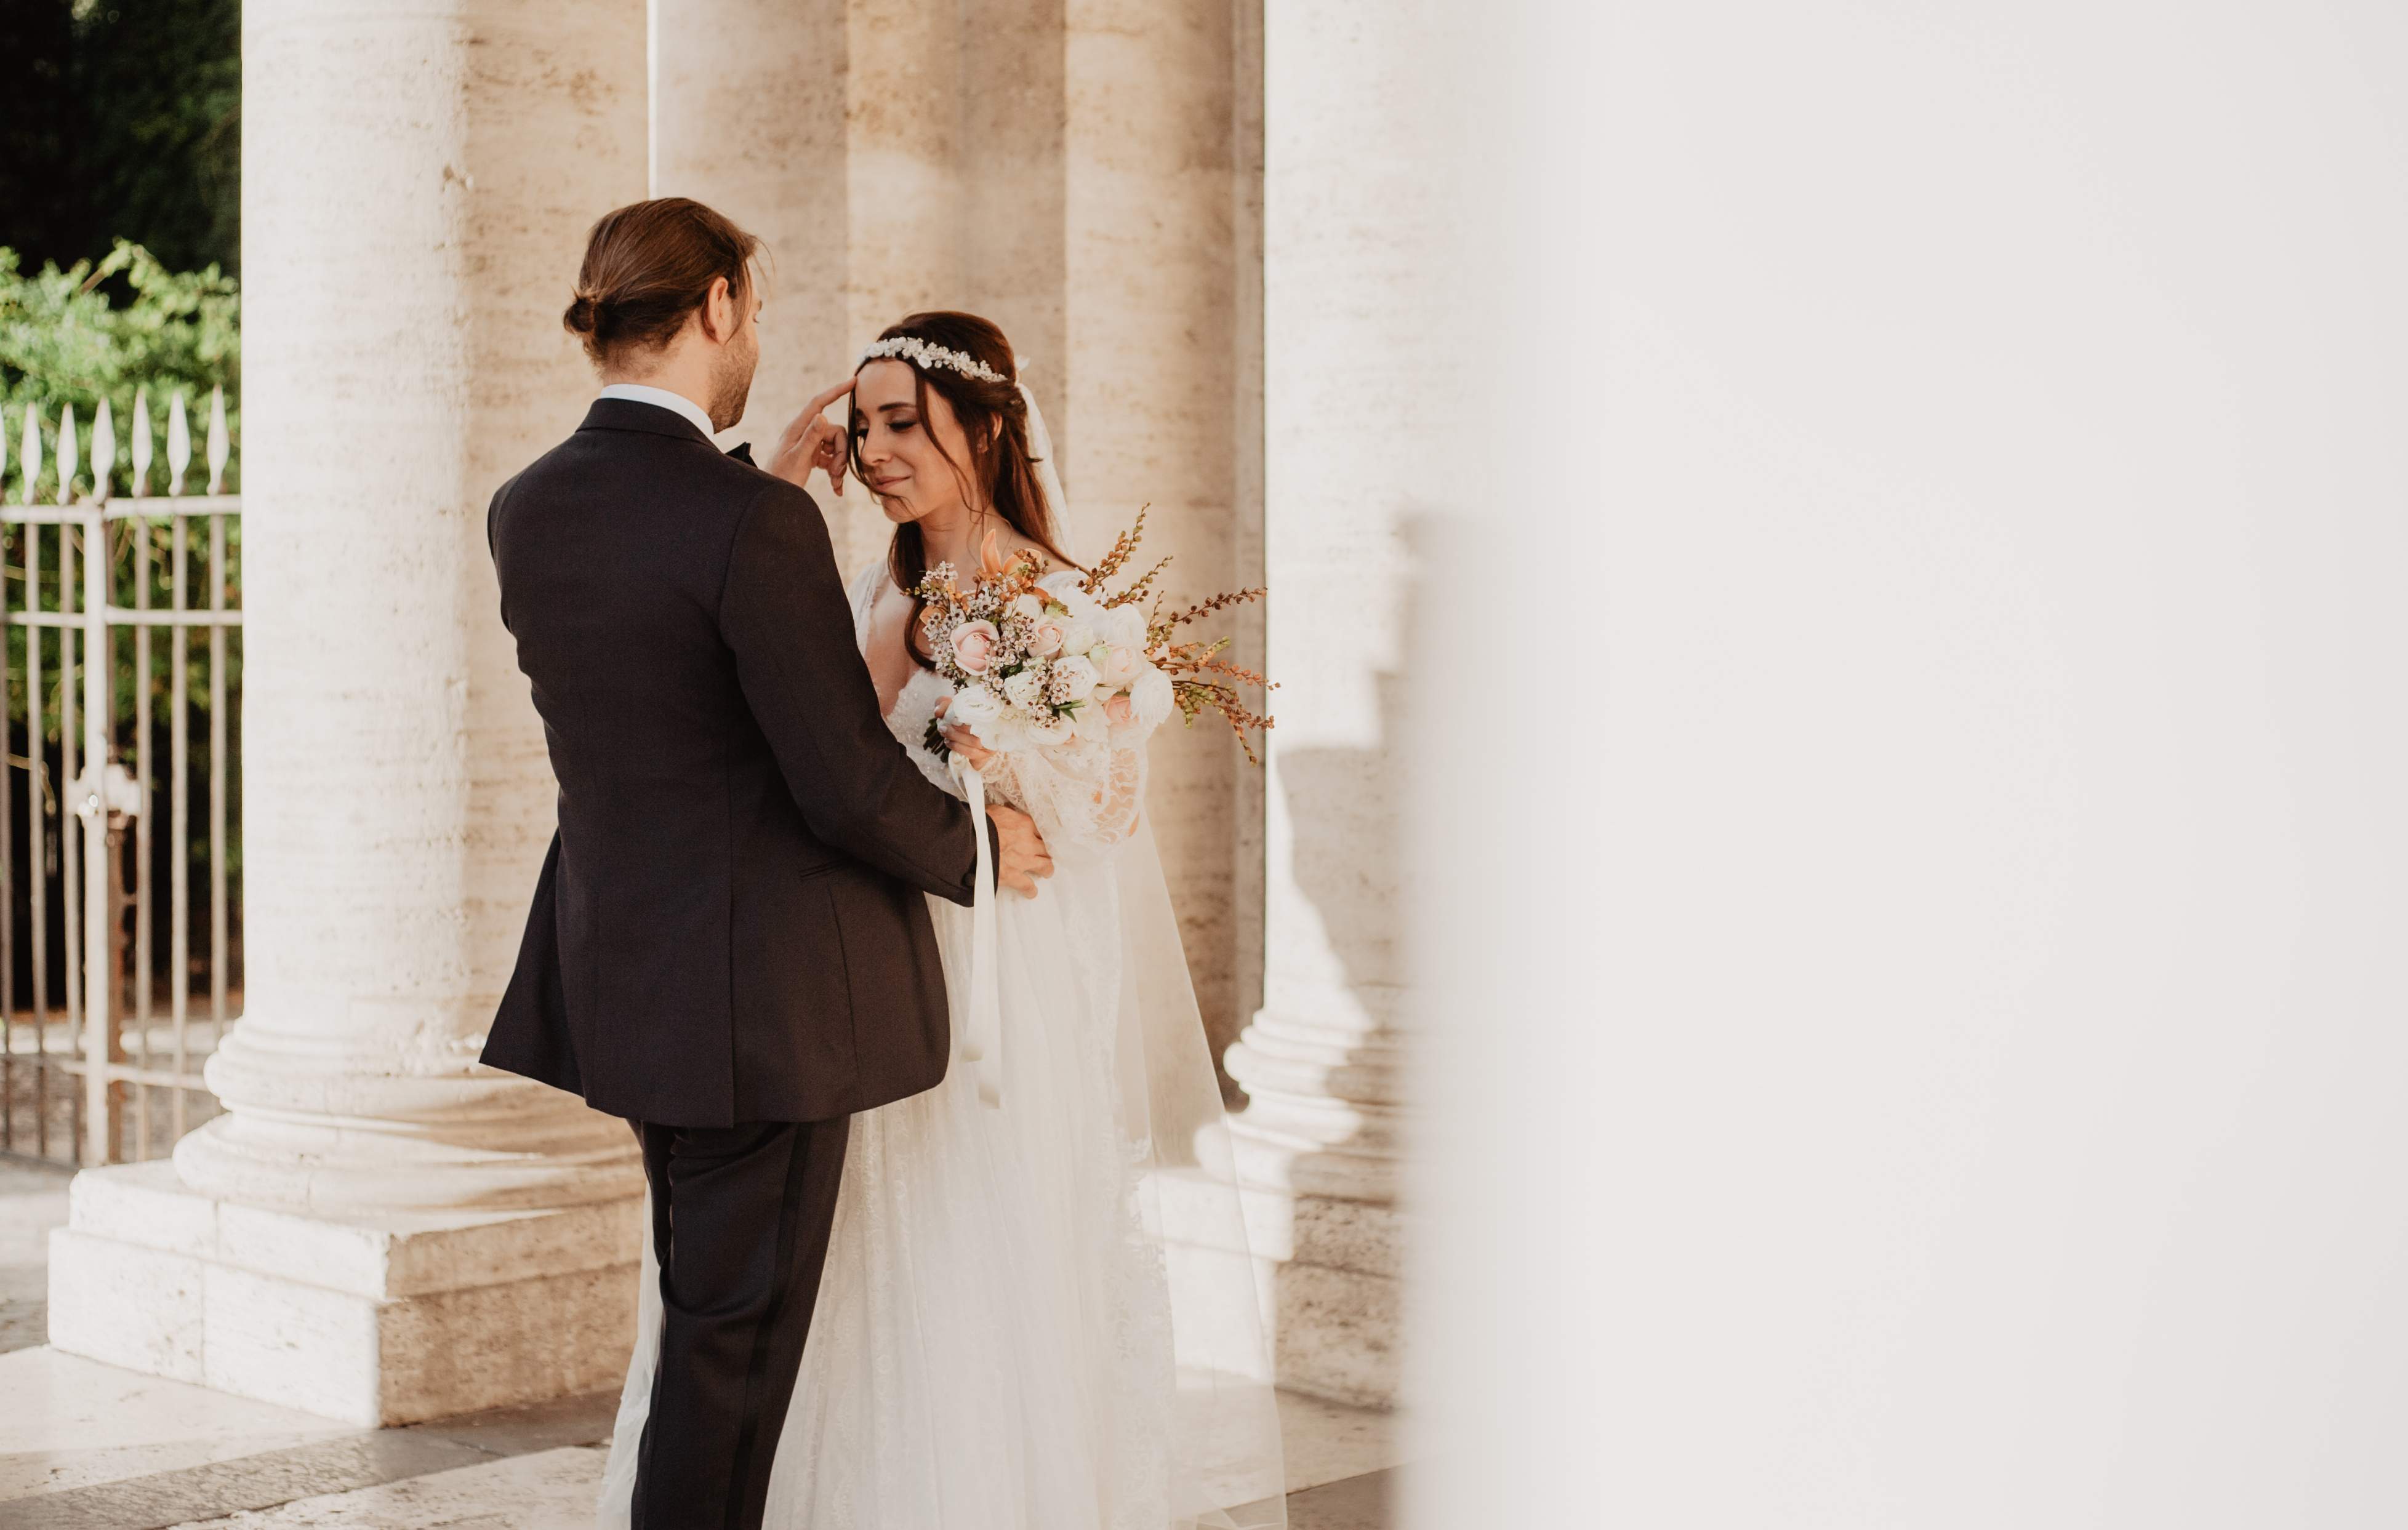 Real Weddings in Italy